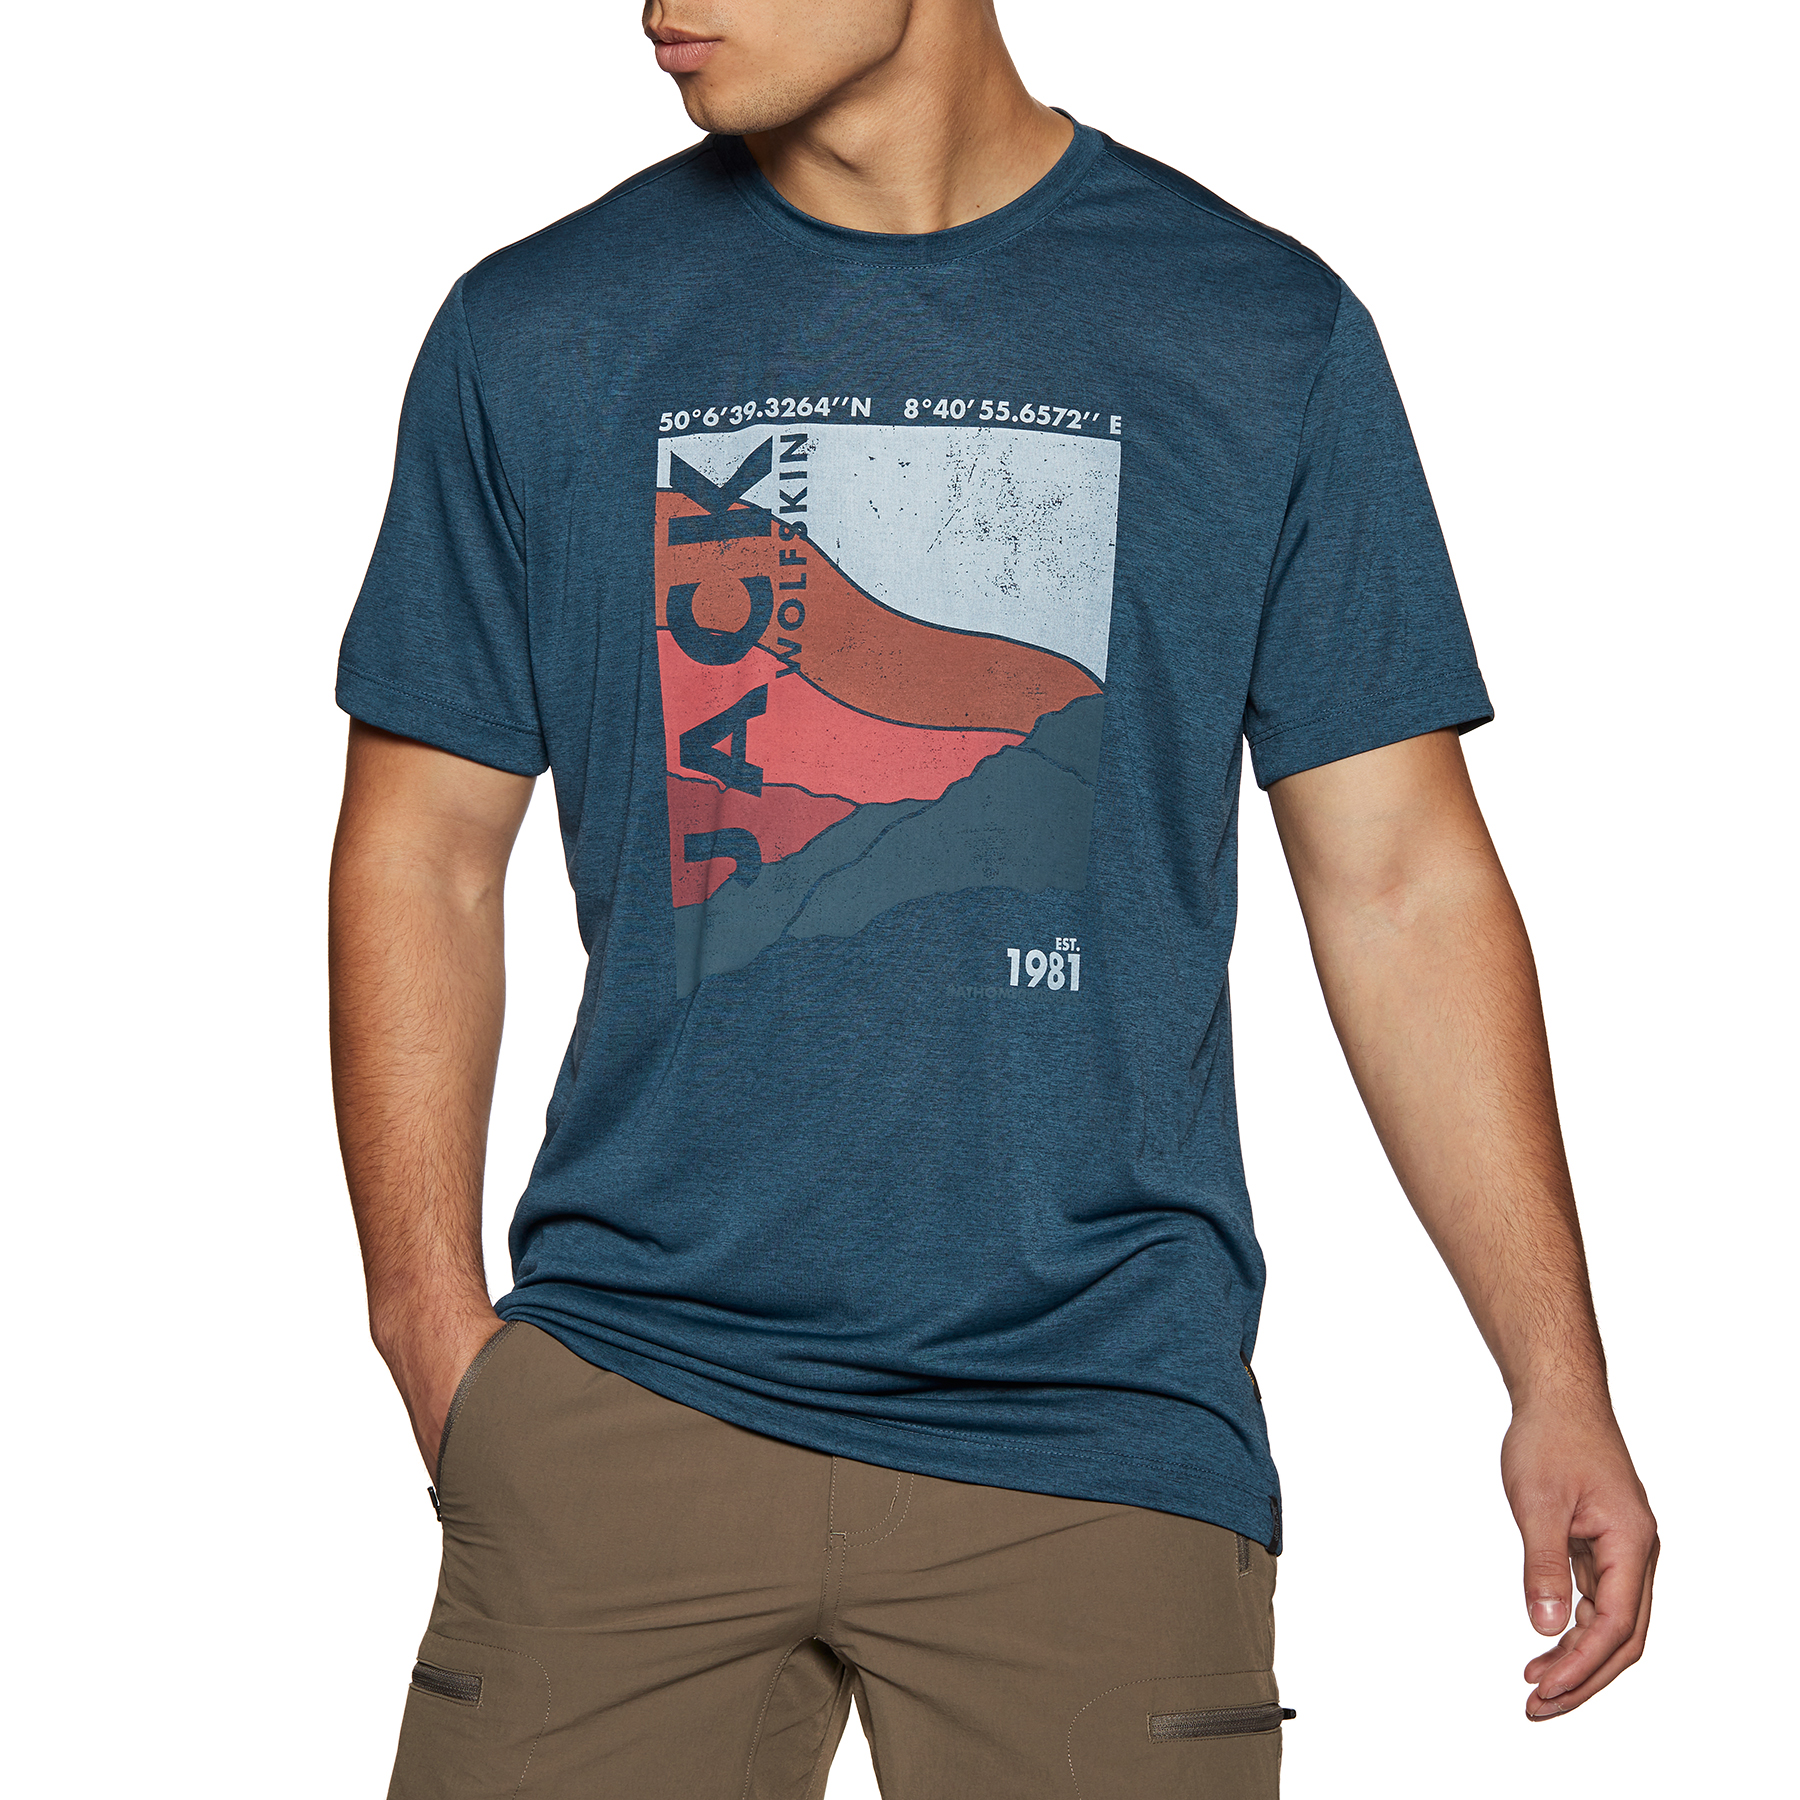 Get Free Delivery Jack Wolfskin Sleeve Prices T-Shirt Short Crosstrail Graphic Affordable at